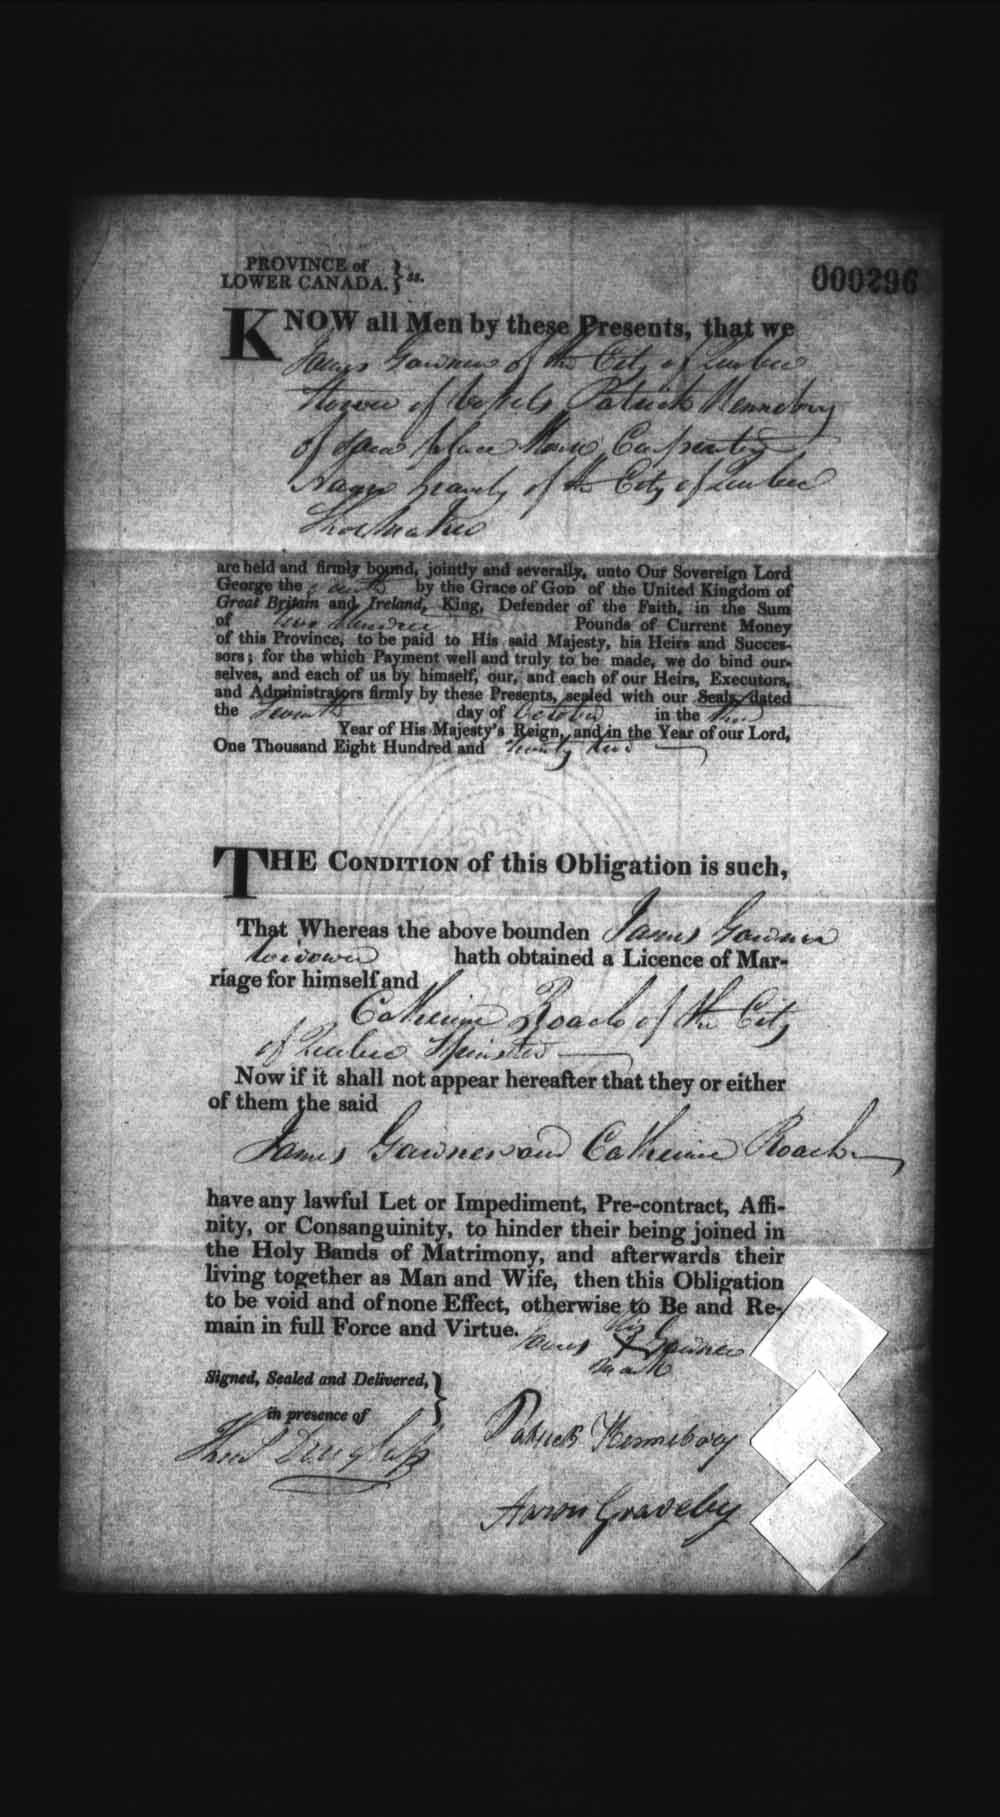 Digitized page of Upper and Lower Canada Marriage Bonds (1779-1865) for Image No.: e008236171